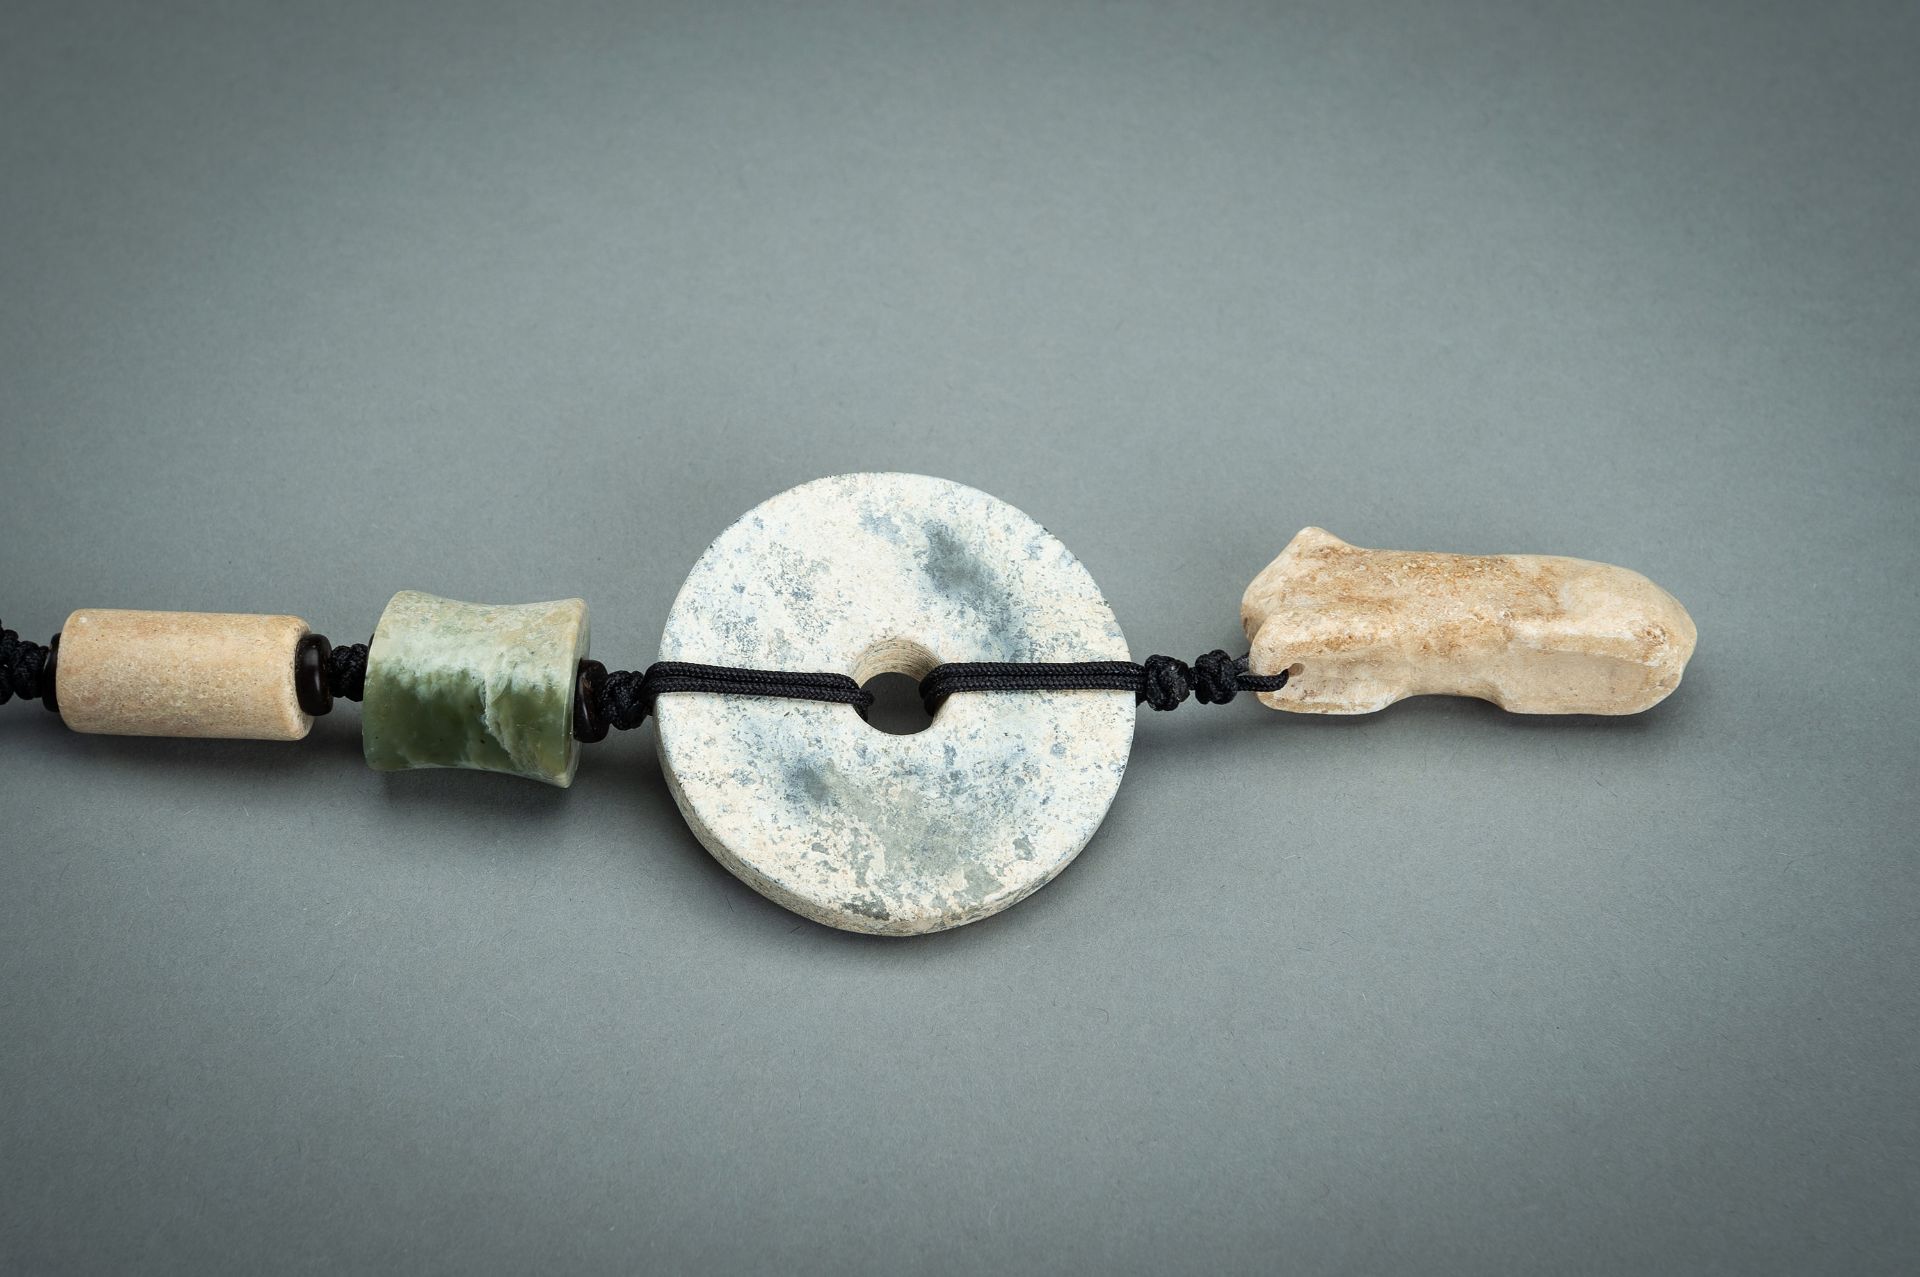 A PENDANT WITH JADE AND HARDSTONE ORNAMENTS, QING - Image 10 of 13